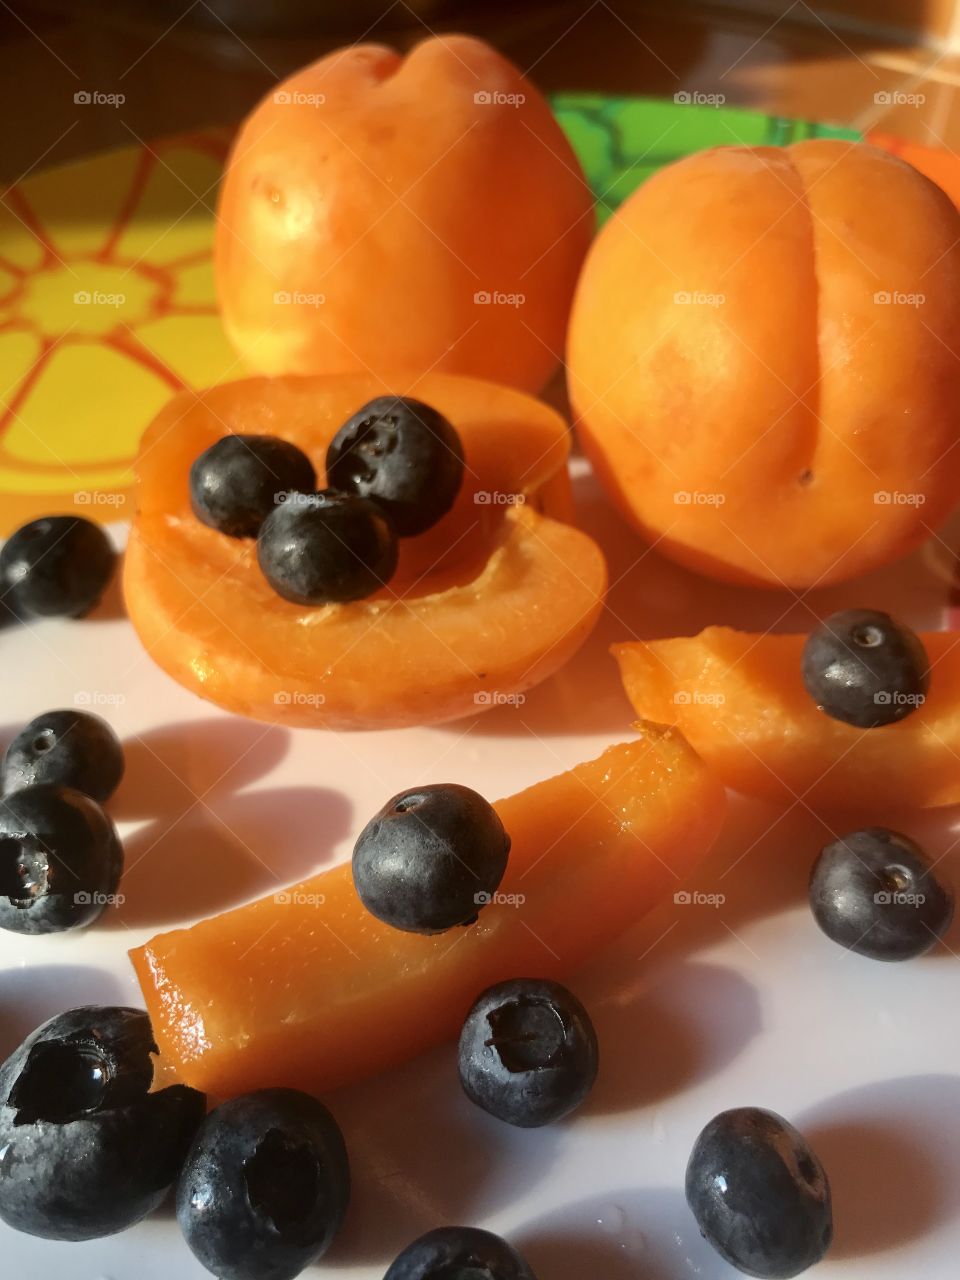 Yummy Apricots and blueberries 